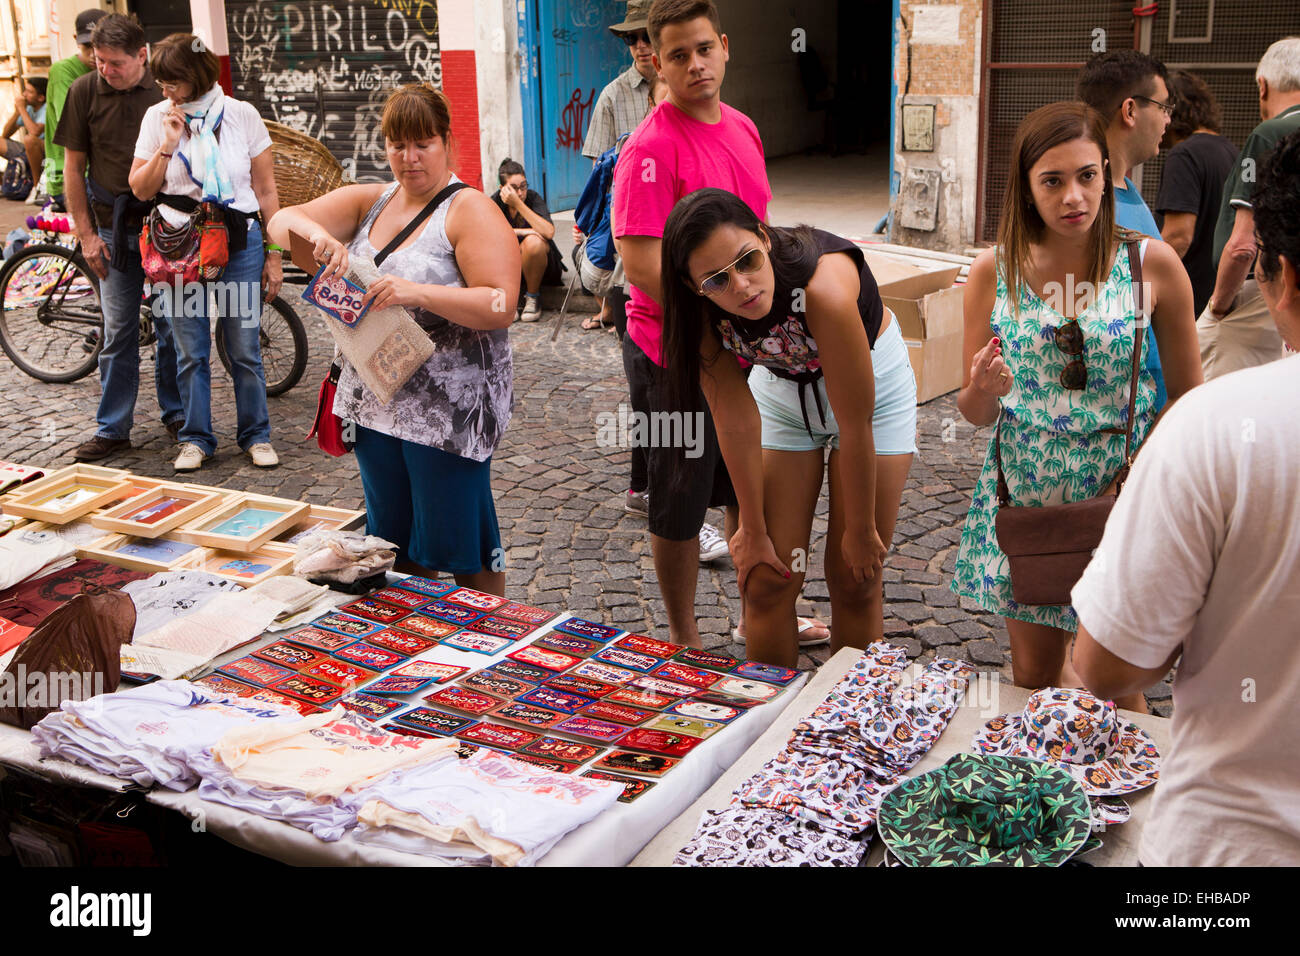 Argentina, Buenos Aires, San Telmo market, female customers at painted name sign stall Stock Photo